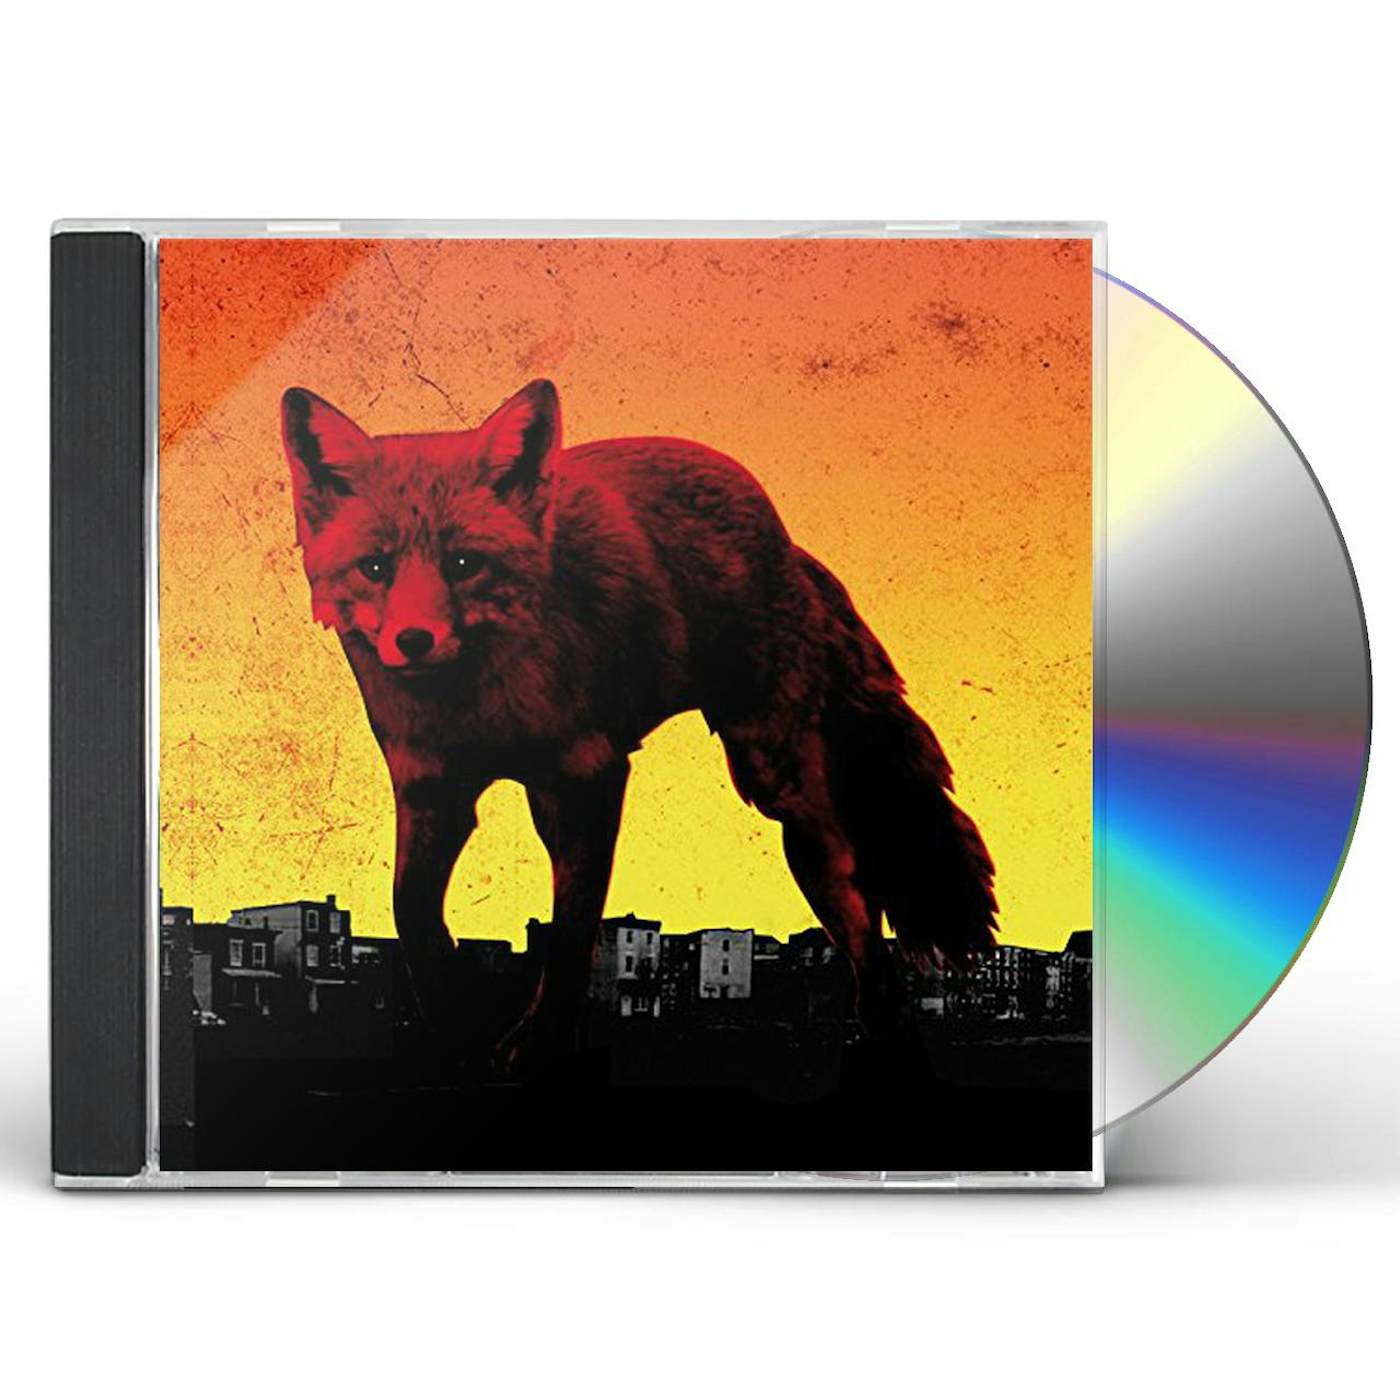 The Prodigy DAY IS MY ENEMY CD